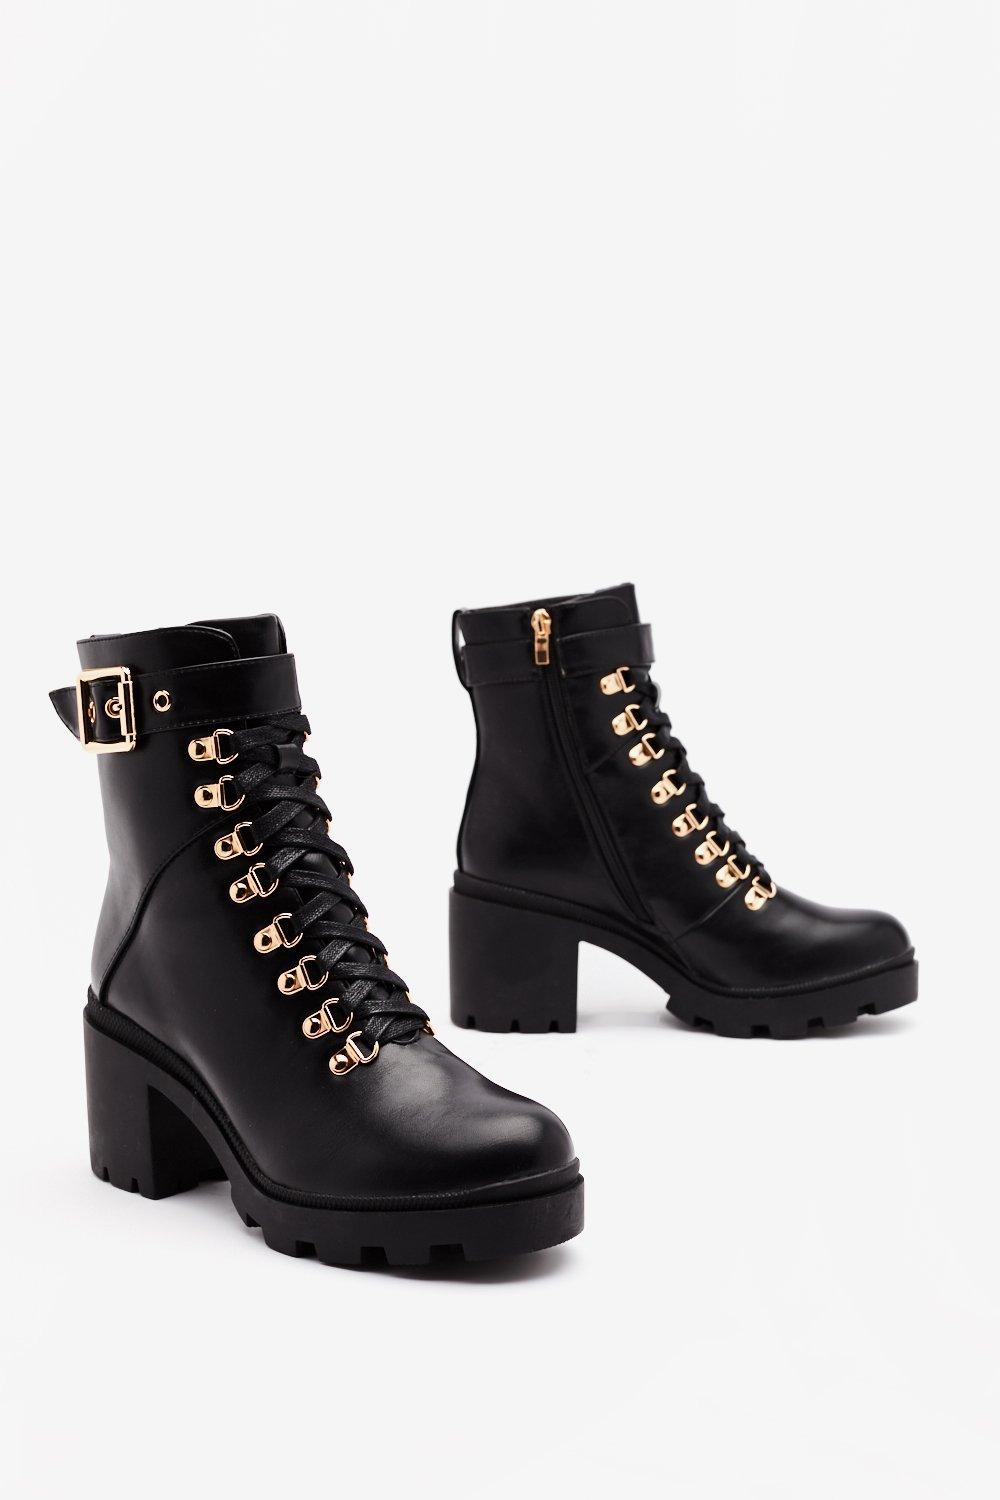 black block heel lace up boots